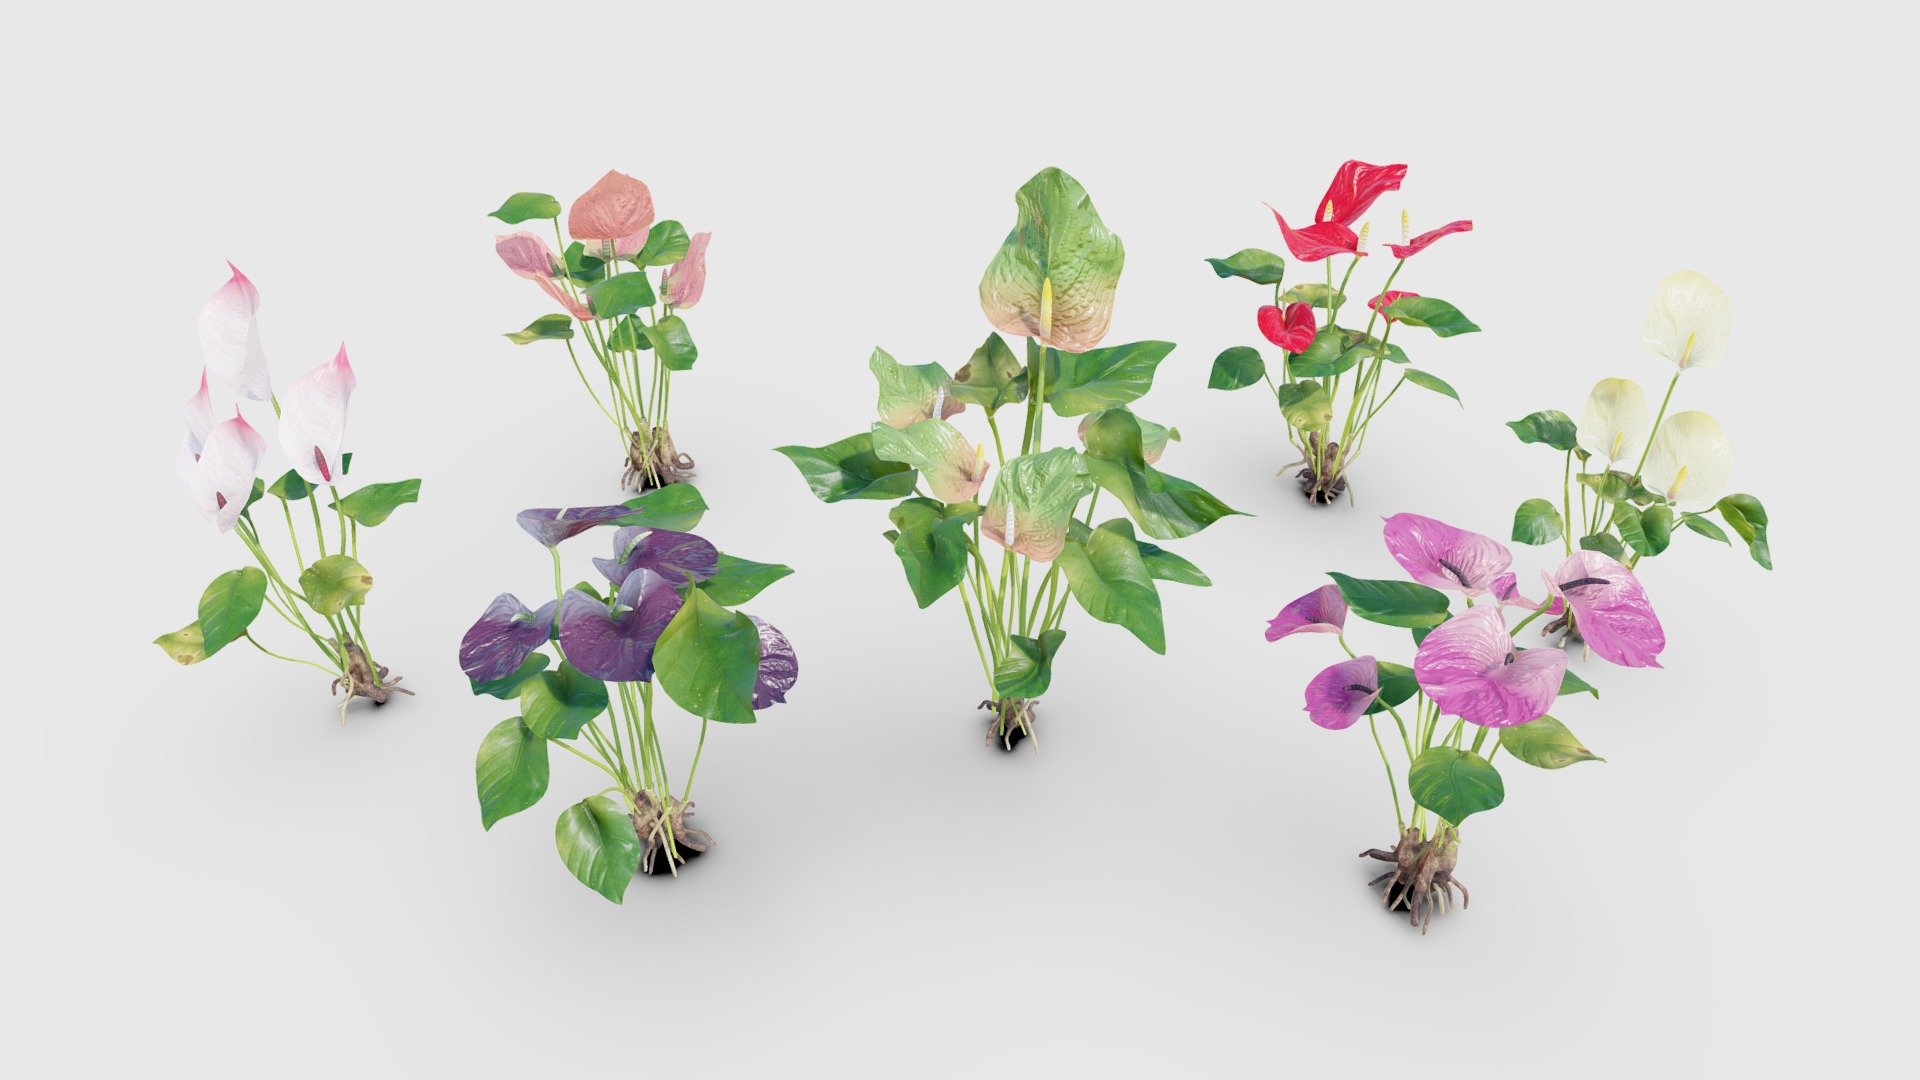 Check out my website for more products and better deals! 👉 SM5 by Heledahn 👈

This is a digital 3D model of seven Anthurium plants with flowers in different colors and shapes. The colors of the leaves and flowers can be swapped for a great variety of plants.

Beautiful, low-poly, and realistic Anthurium in Red, Salmon, Green, Purple, Pink, Yellow and White colors.

👌 The textures can be interchanged between the models, allowing for a great variety of plants!

🔹 Textures come in 4K for perfect closeups.

This product will achieve realistic results in your rendering projects, being greatly suited for close-ups due to their high quality topology and PBR shading 3d model